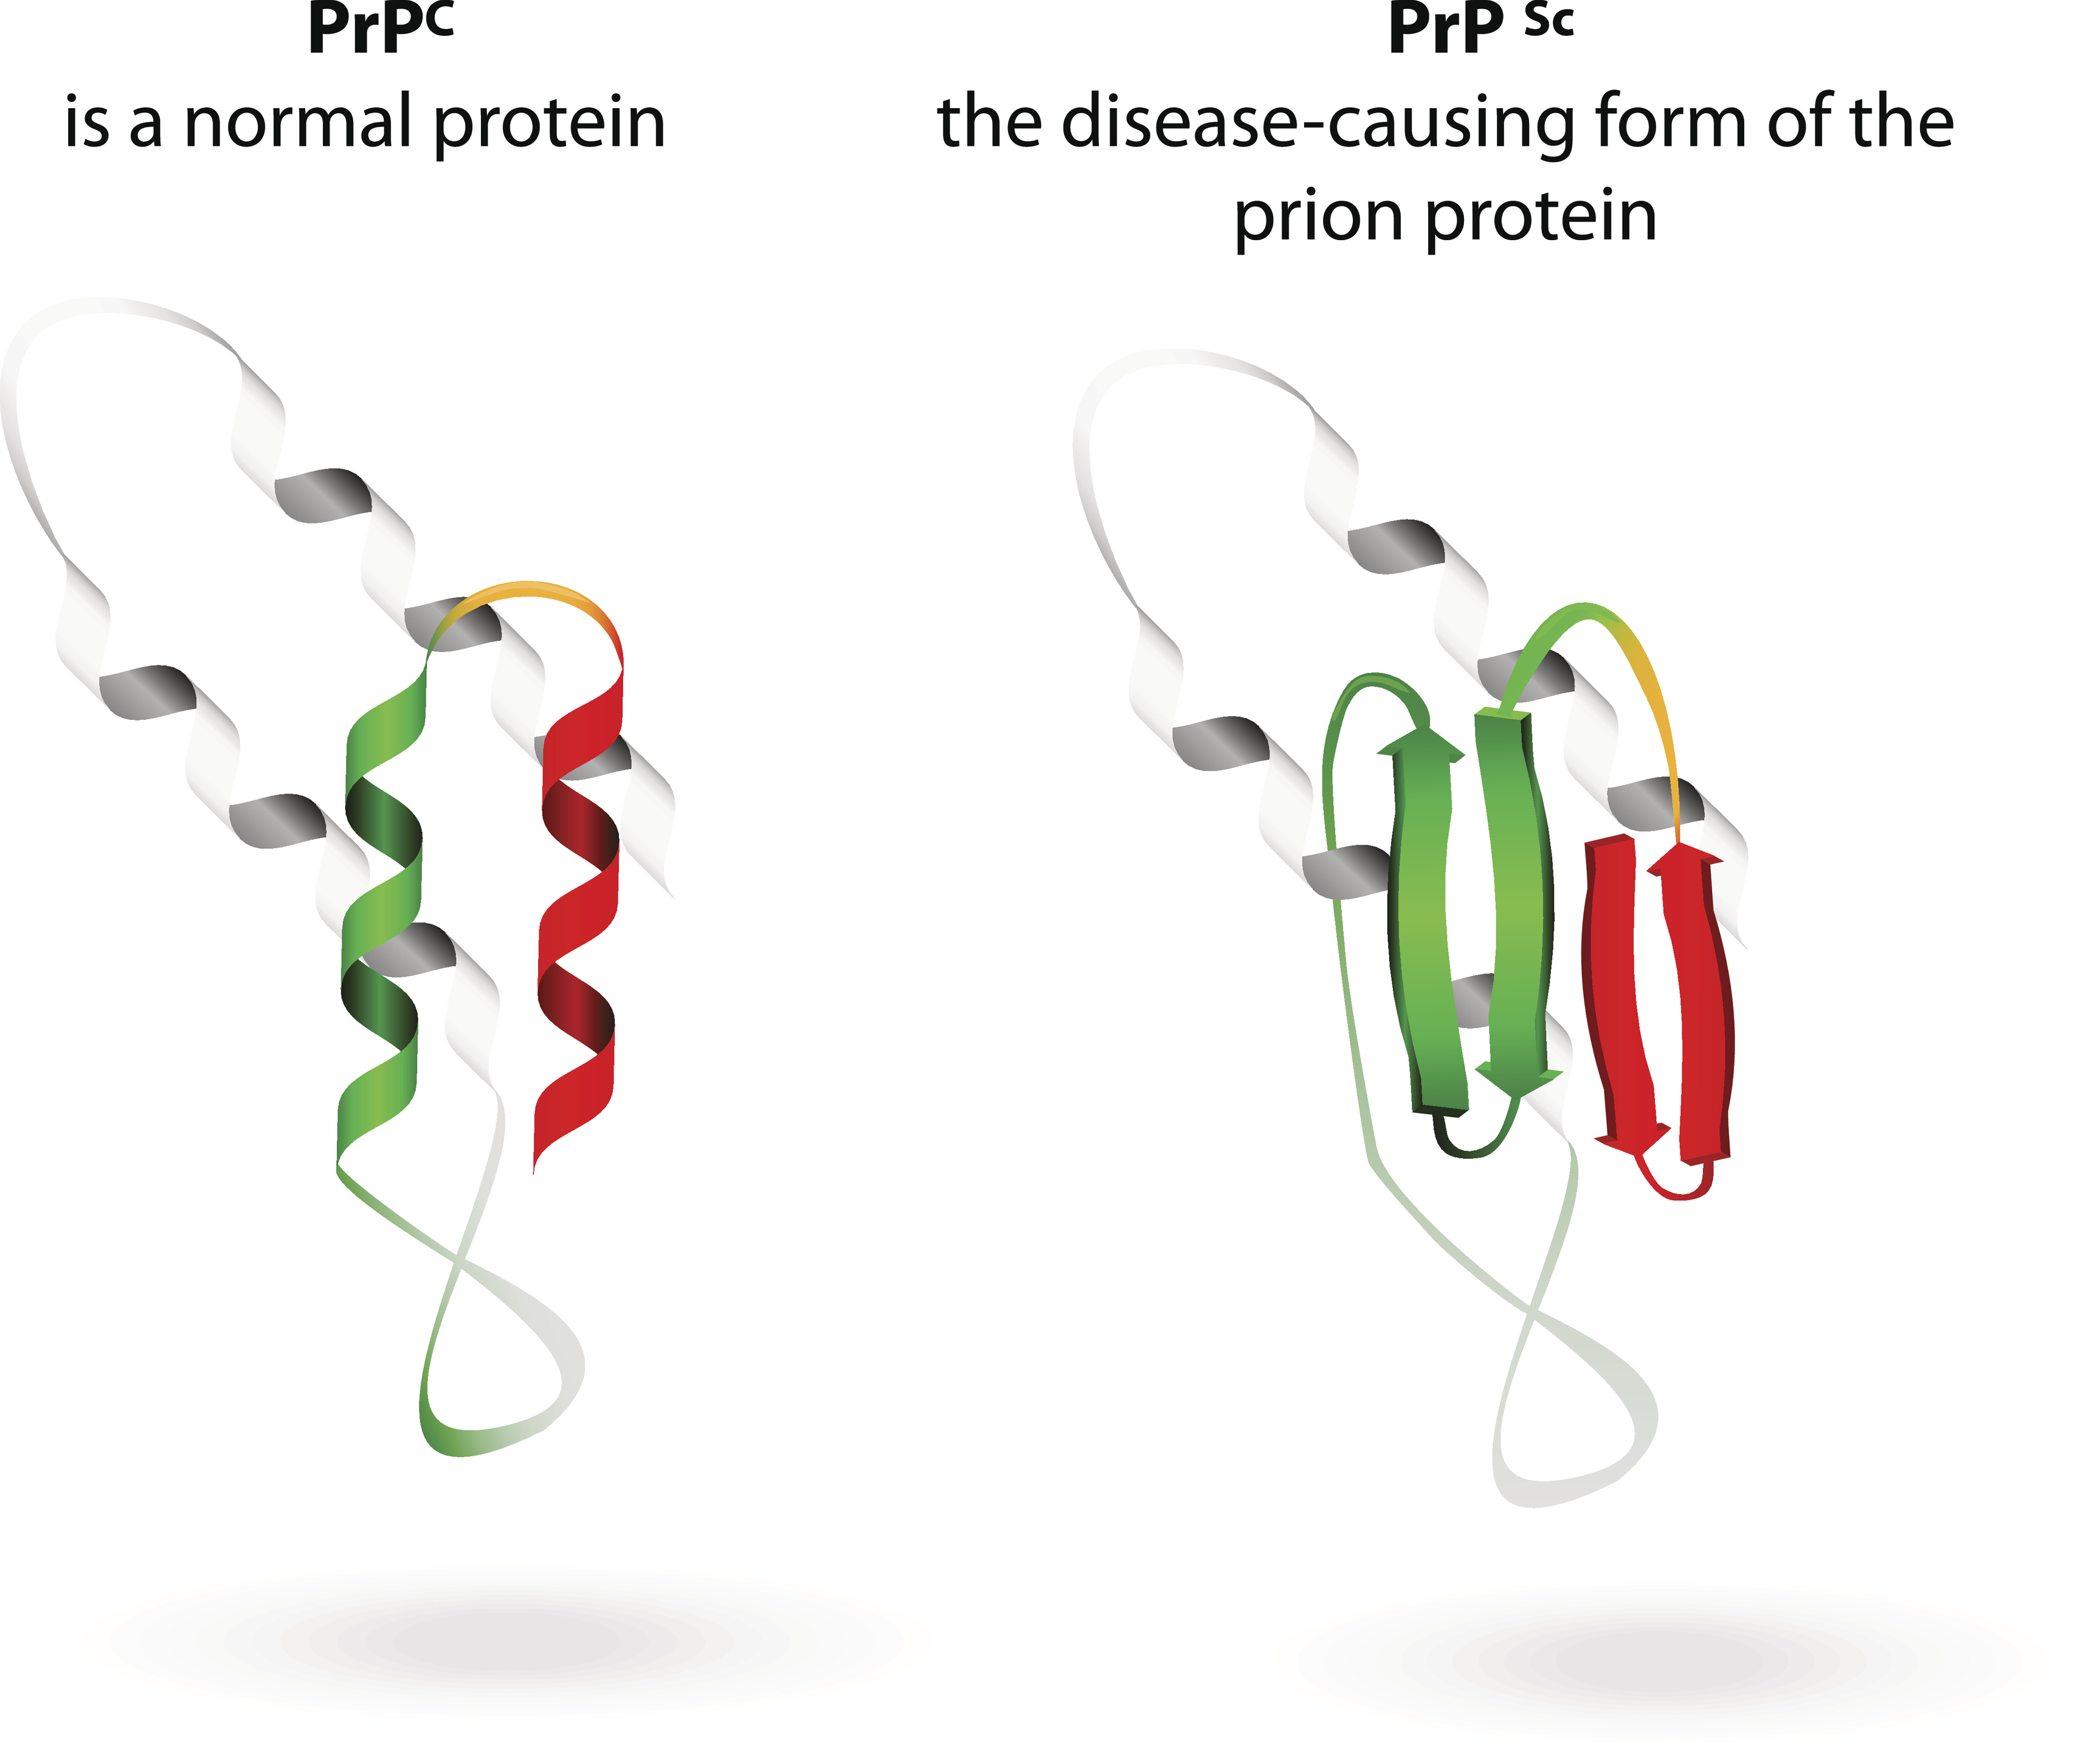 A photo of a normal protein and a misfolded protein